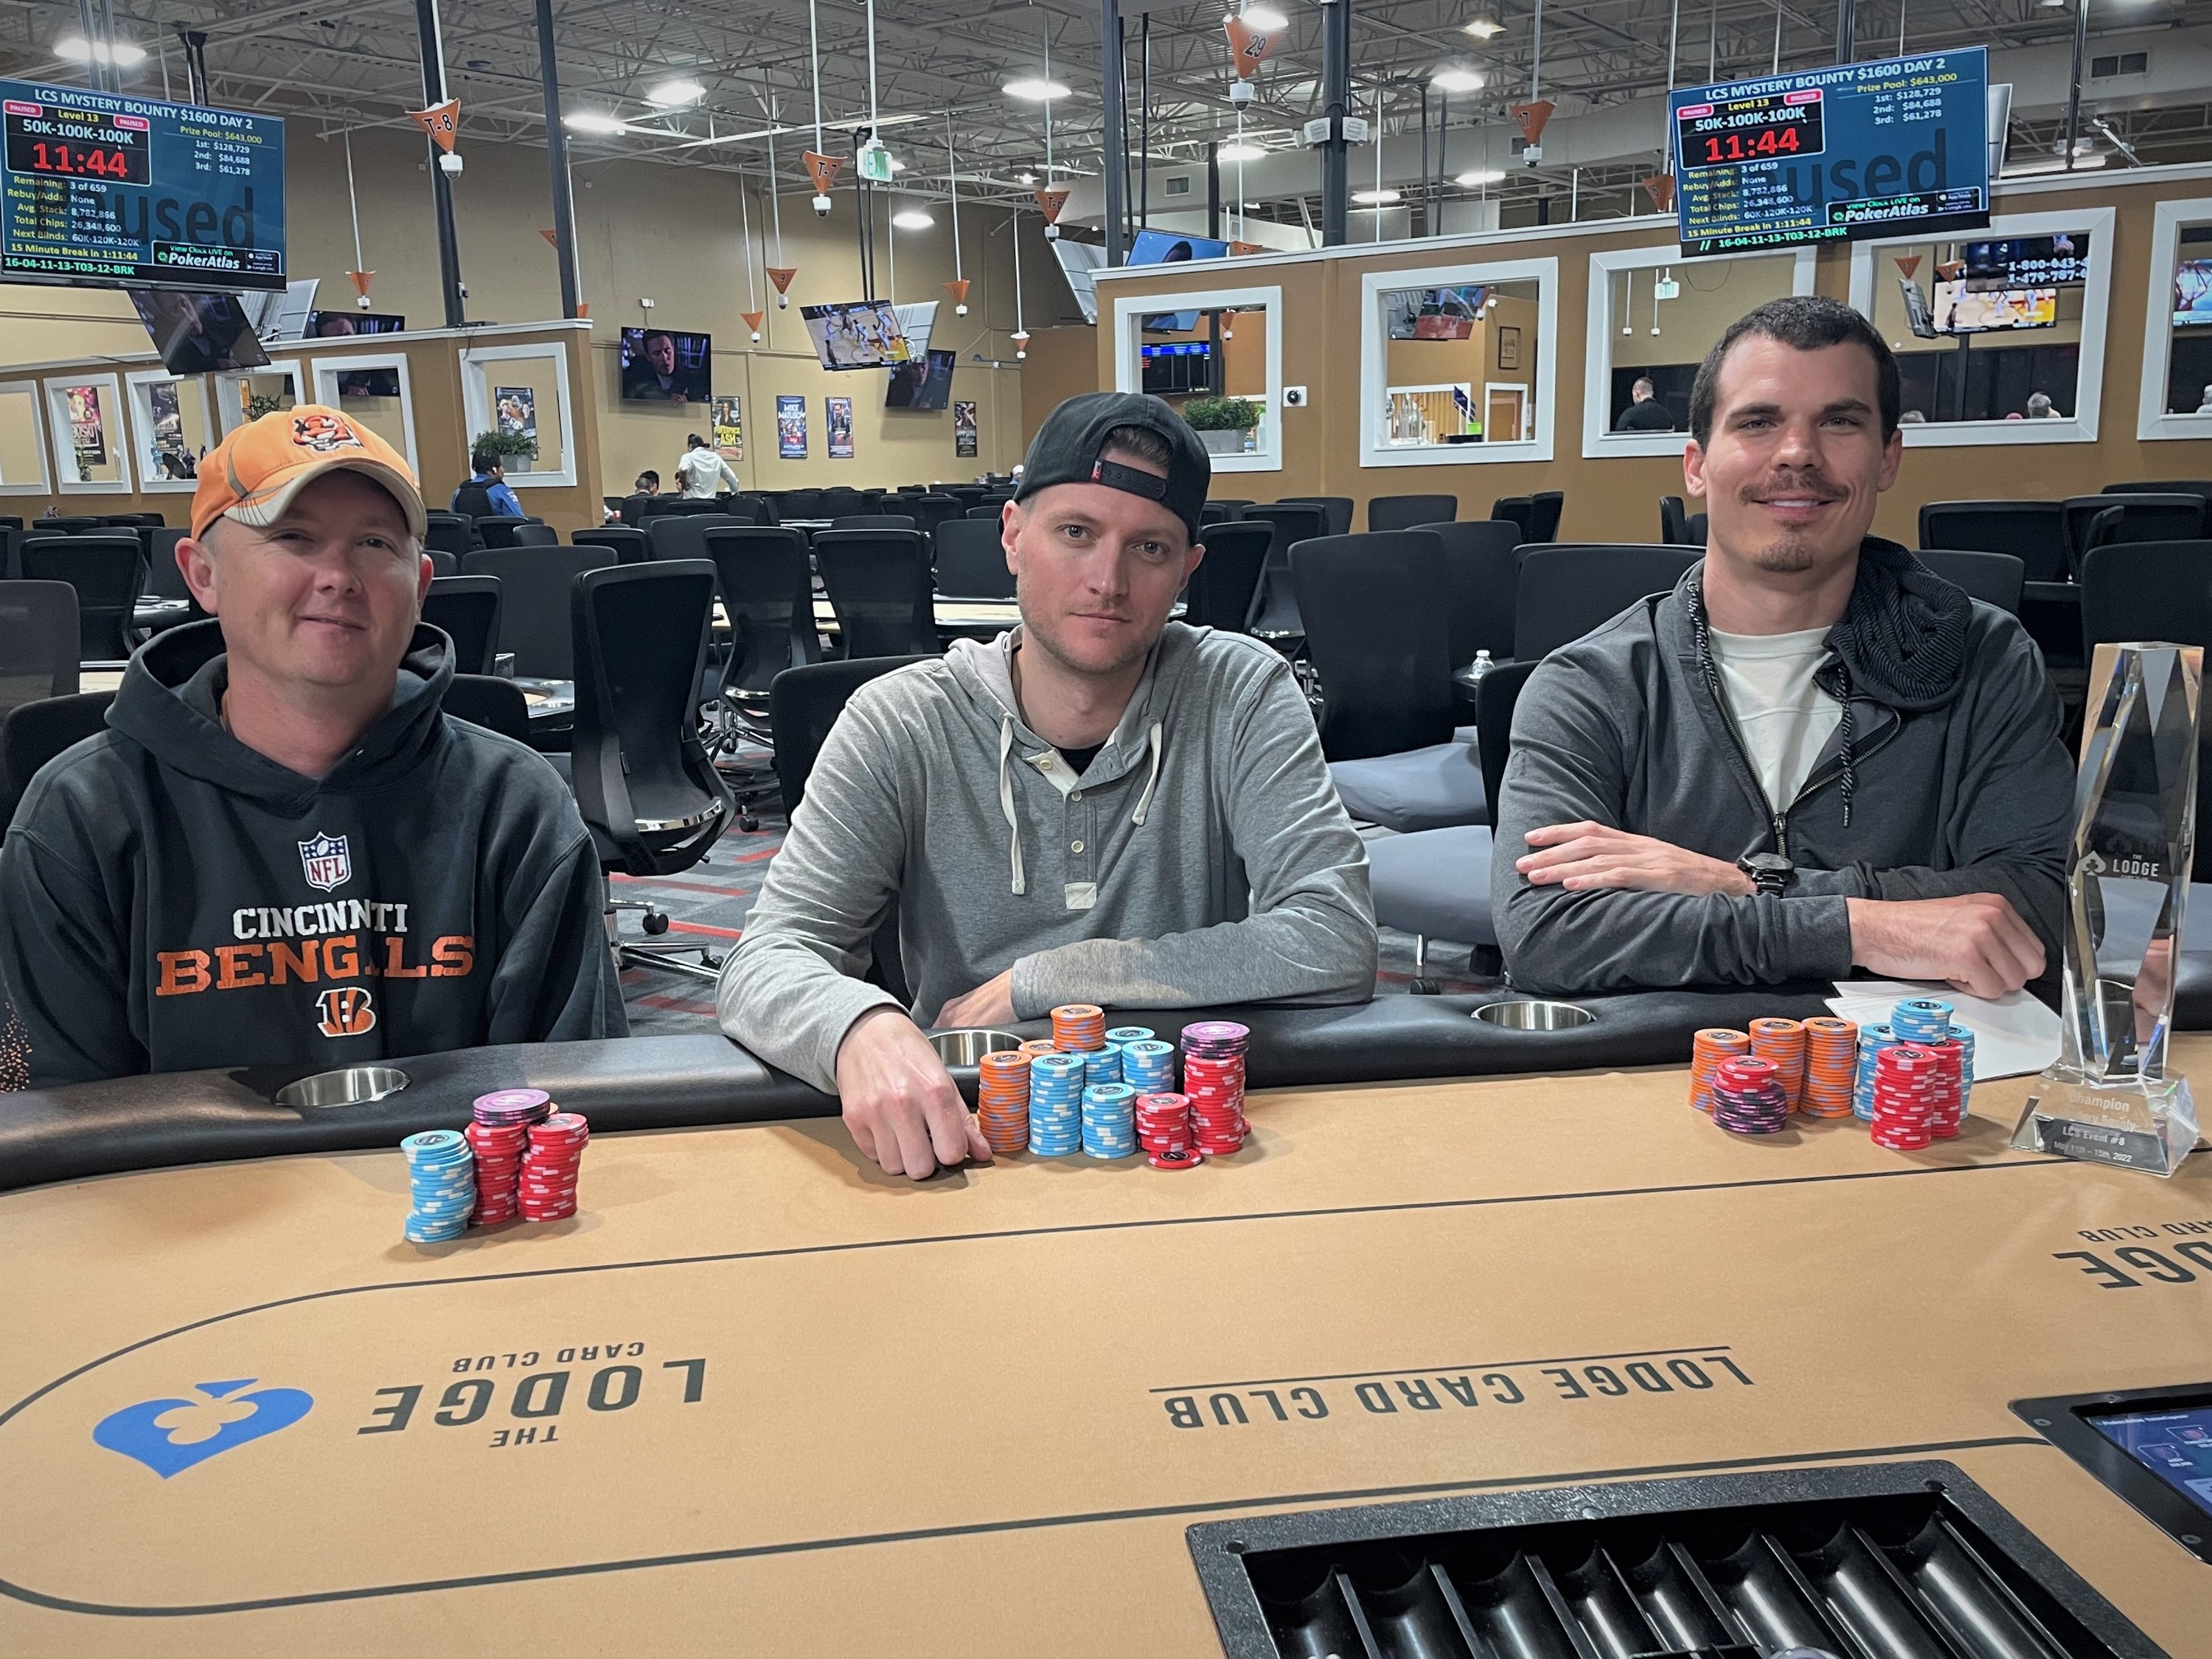 Zachary Hambrice Claims Top Spot After Three-Way Deal at The Lodge Card Club in Texas (,408)